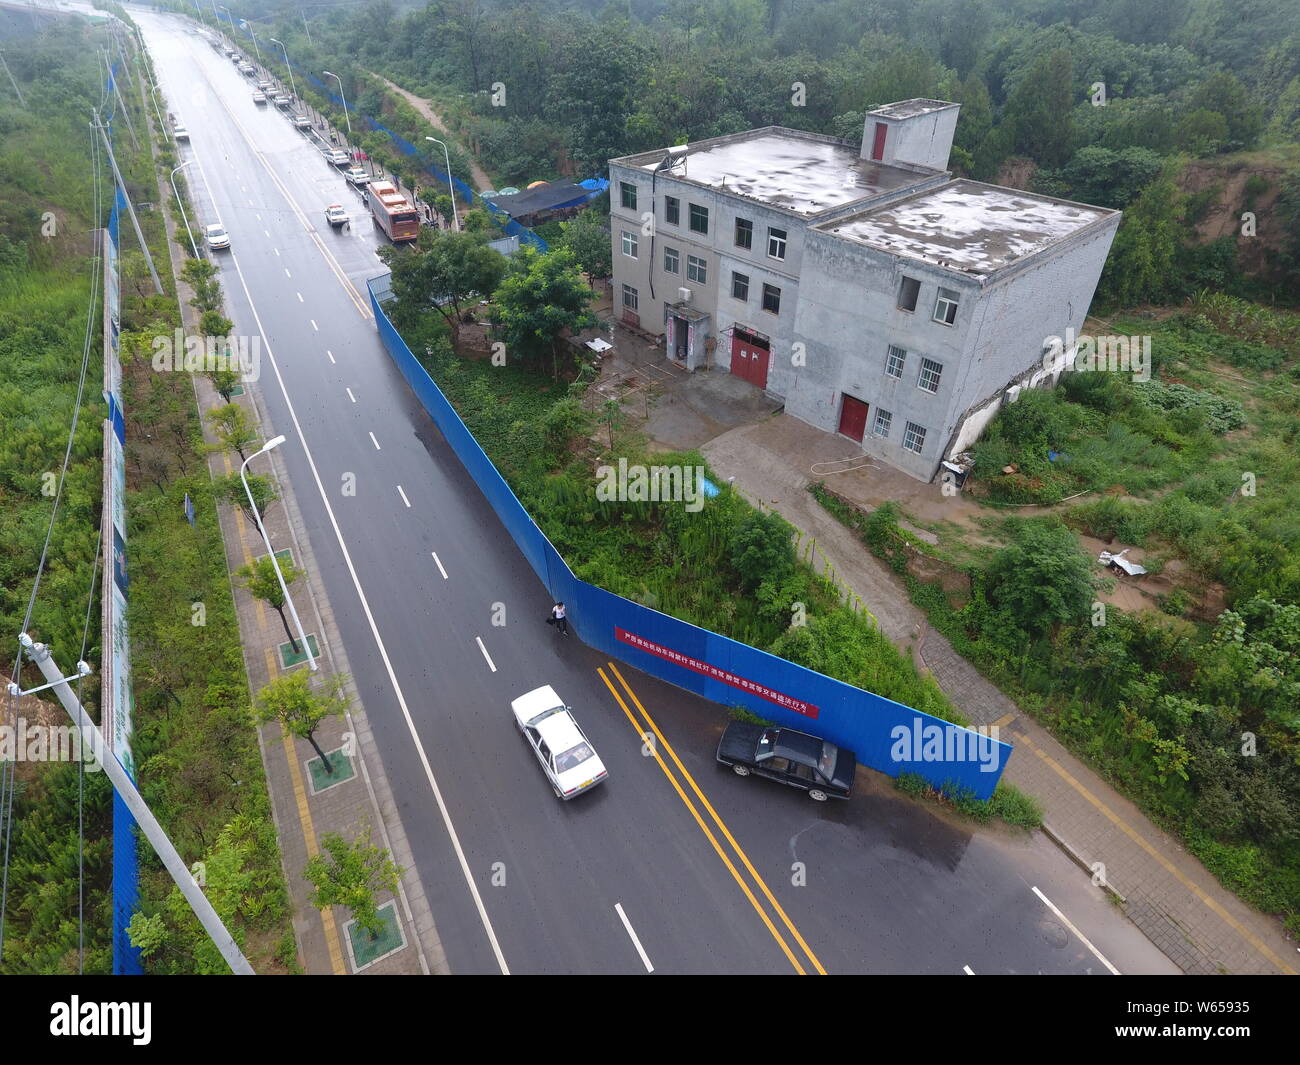 aerial-view-of-the-nail-house-chopping-off-a-road-as-house-owners-refuse-to-move-due-to-compensation-issues-in-zhengzhou-city-central-chinas-henan-p-W65935.jpg